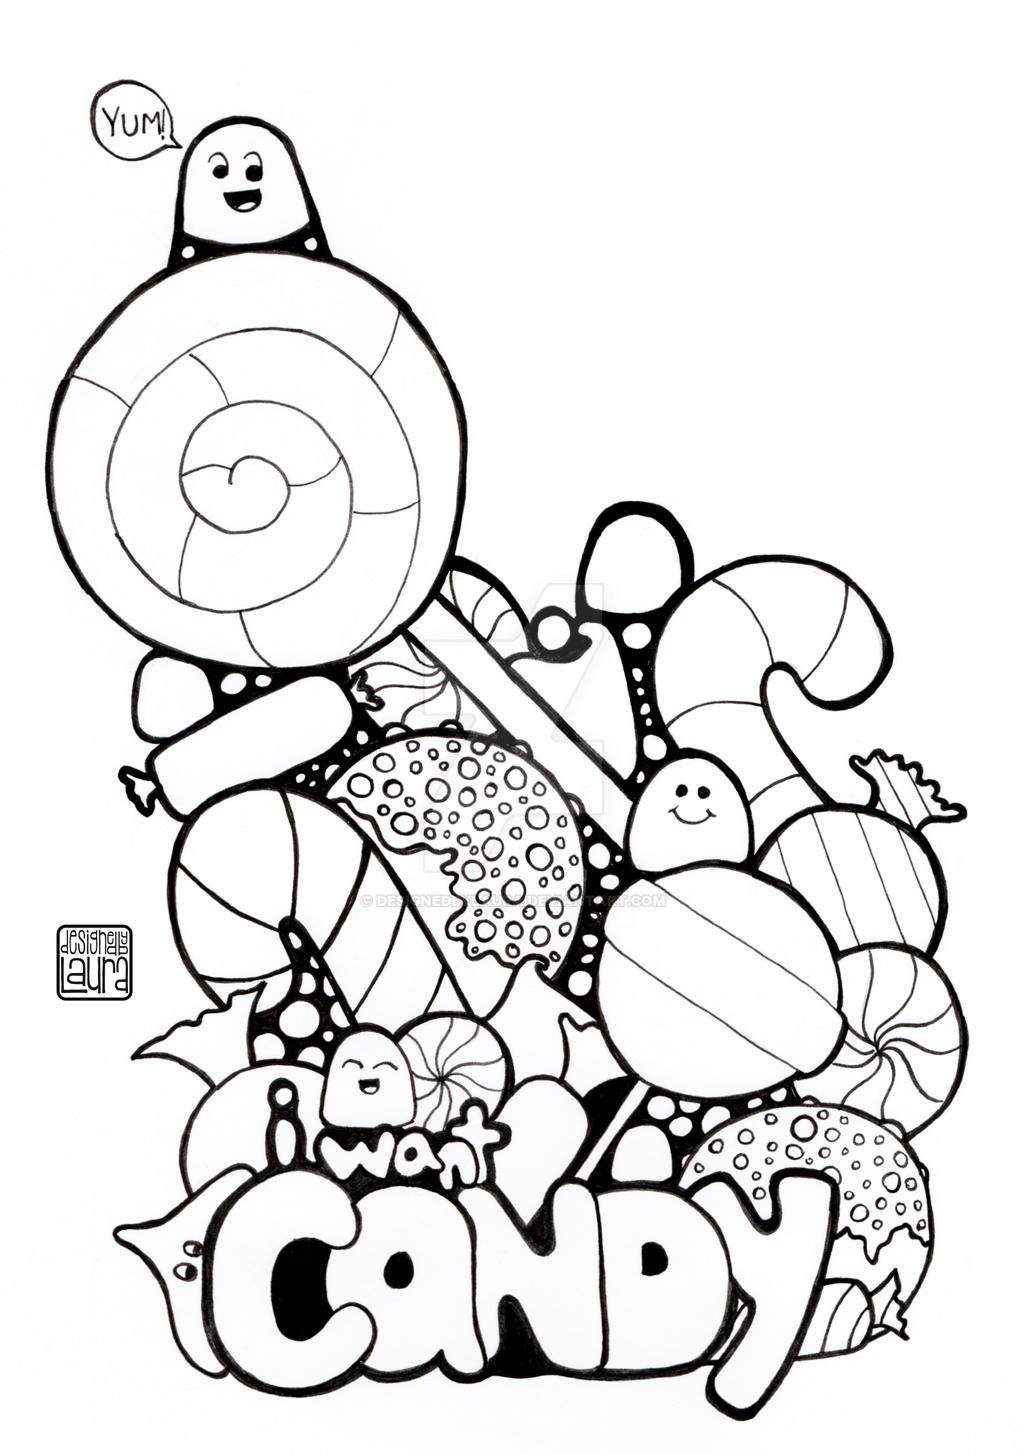 I Want Candy - Coloring Page by DesignedByLaura on DeviantArt